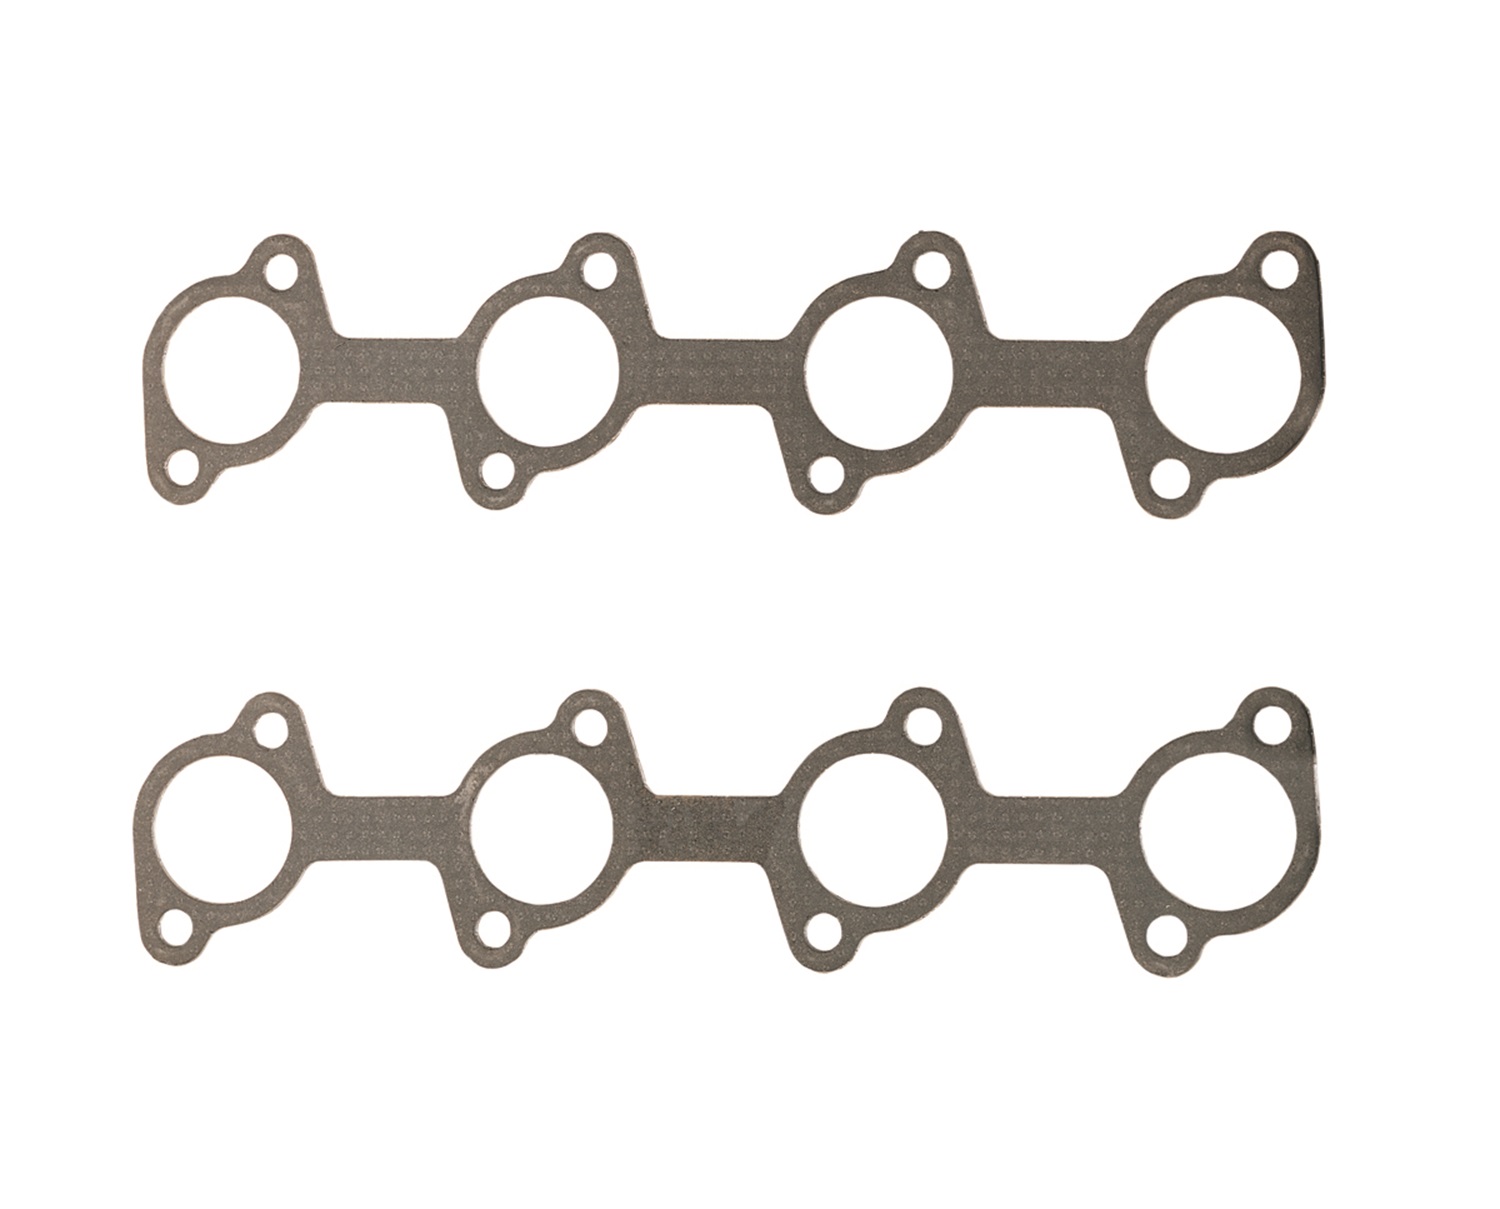 Ford Racing Ford Racing M-9448-A462 Header Gasket Fits 96-04 Mustang